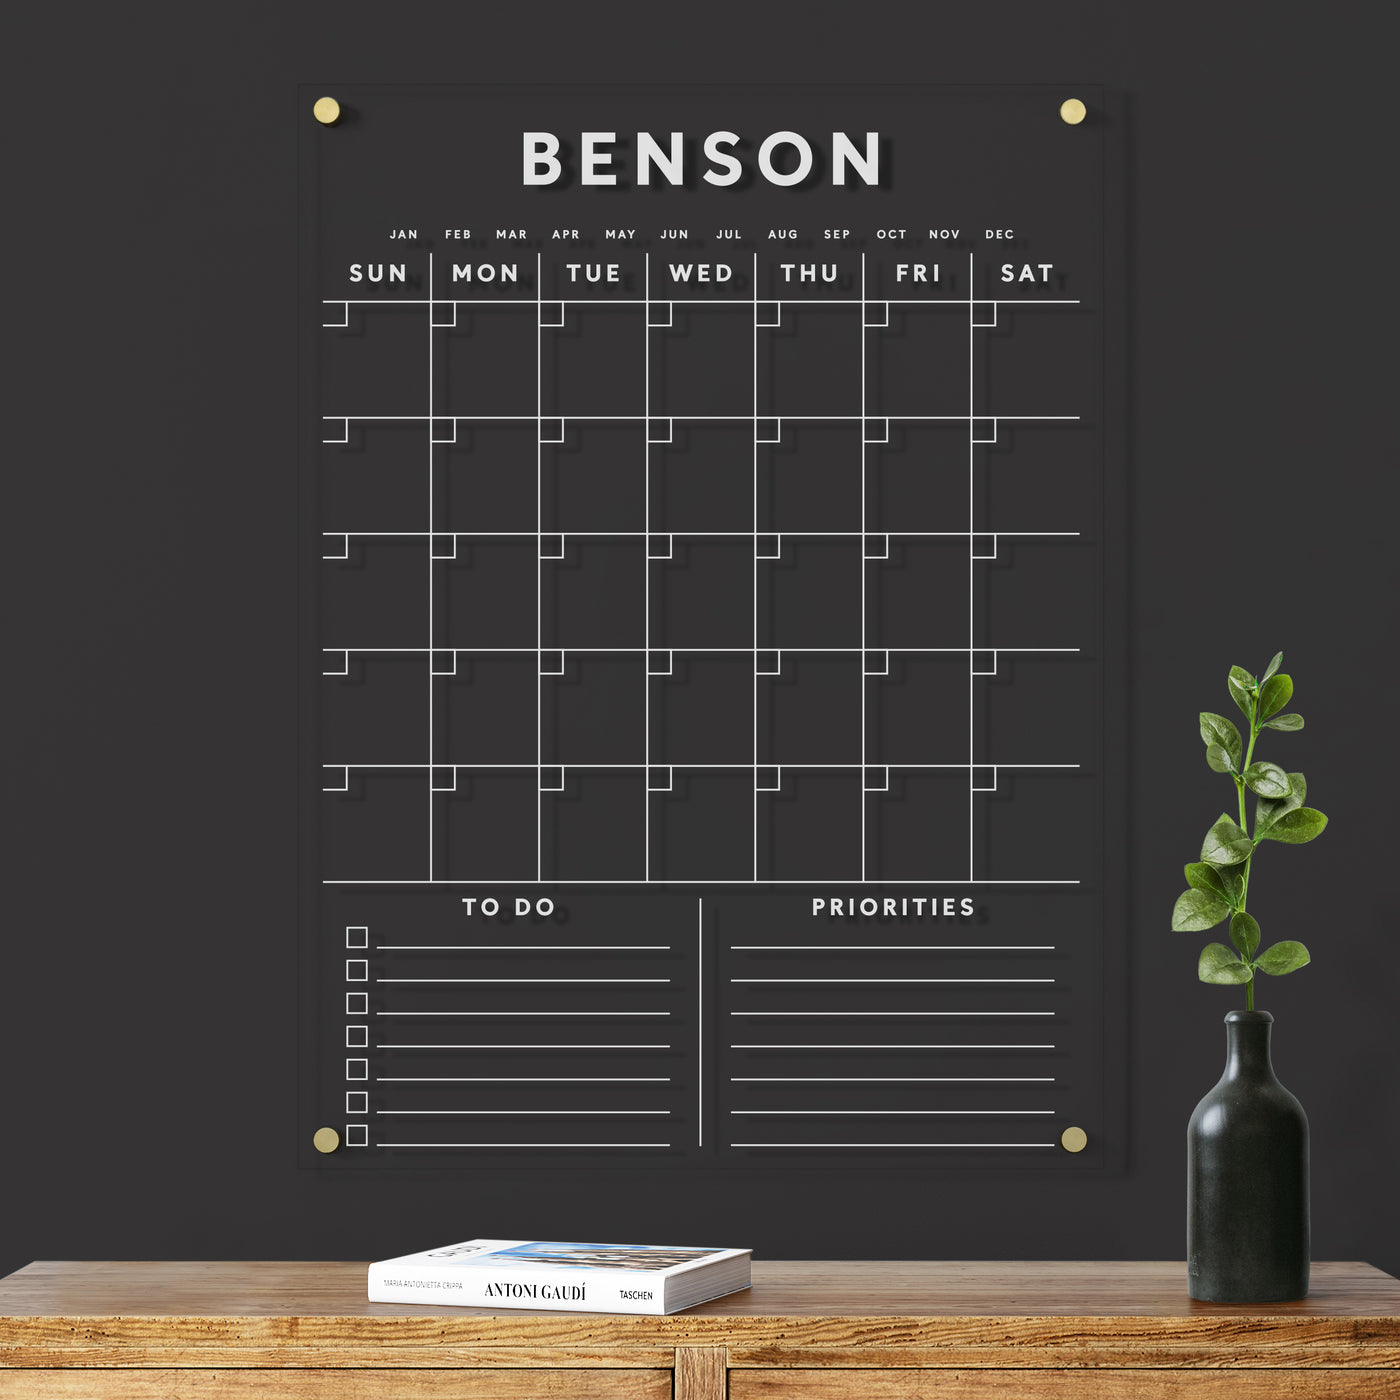 Acrylic Calendar with family name and bottom section - White text